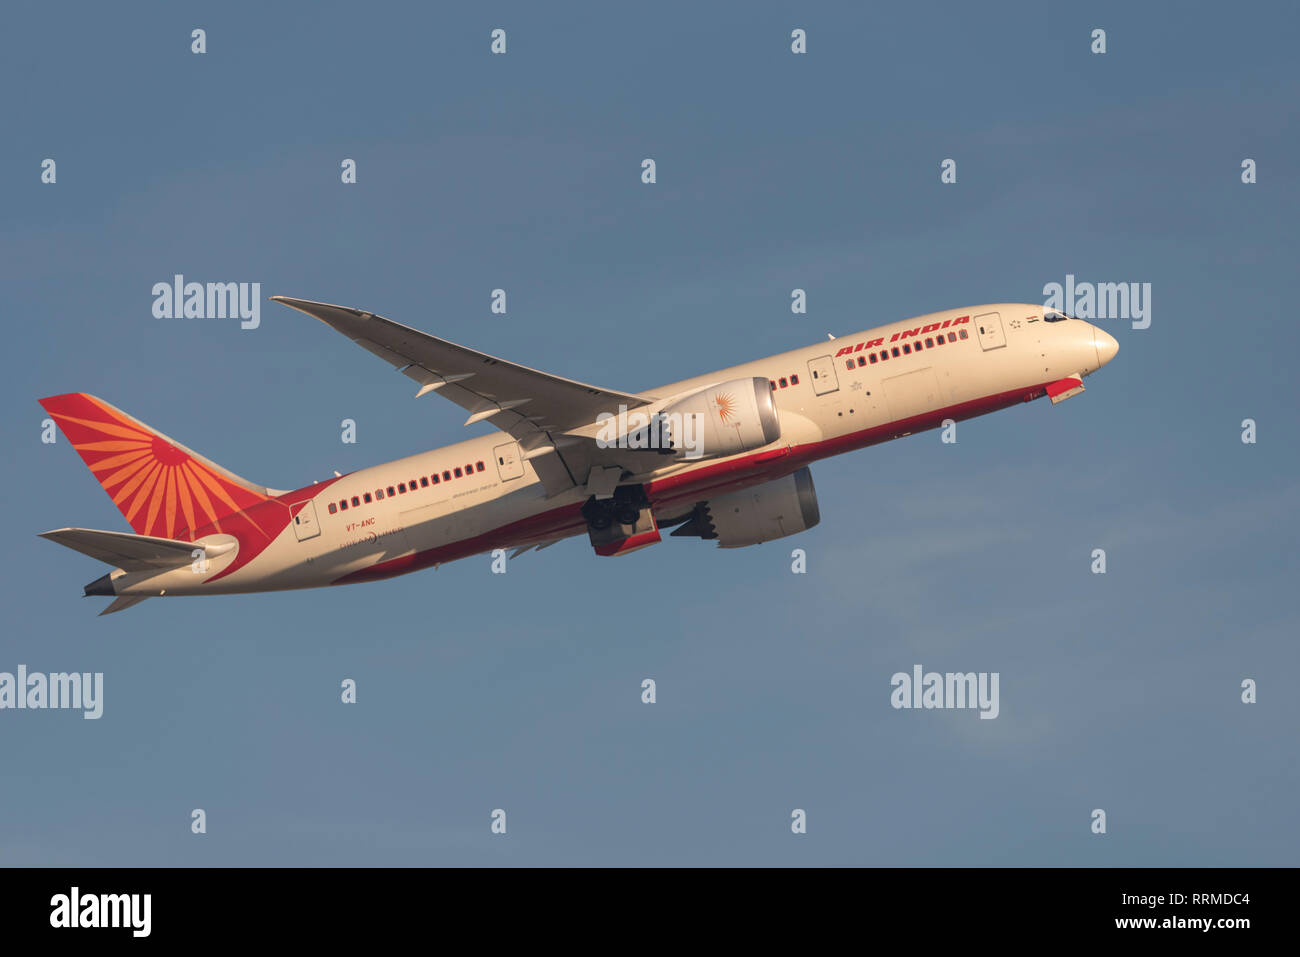 Air India Boeing 787 Dreamliner jet airliner plane VT-ANC taking off from London Heathrow Airport, UK. Airline flight departure Stock Photo